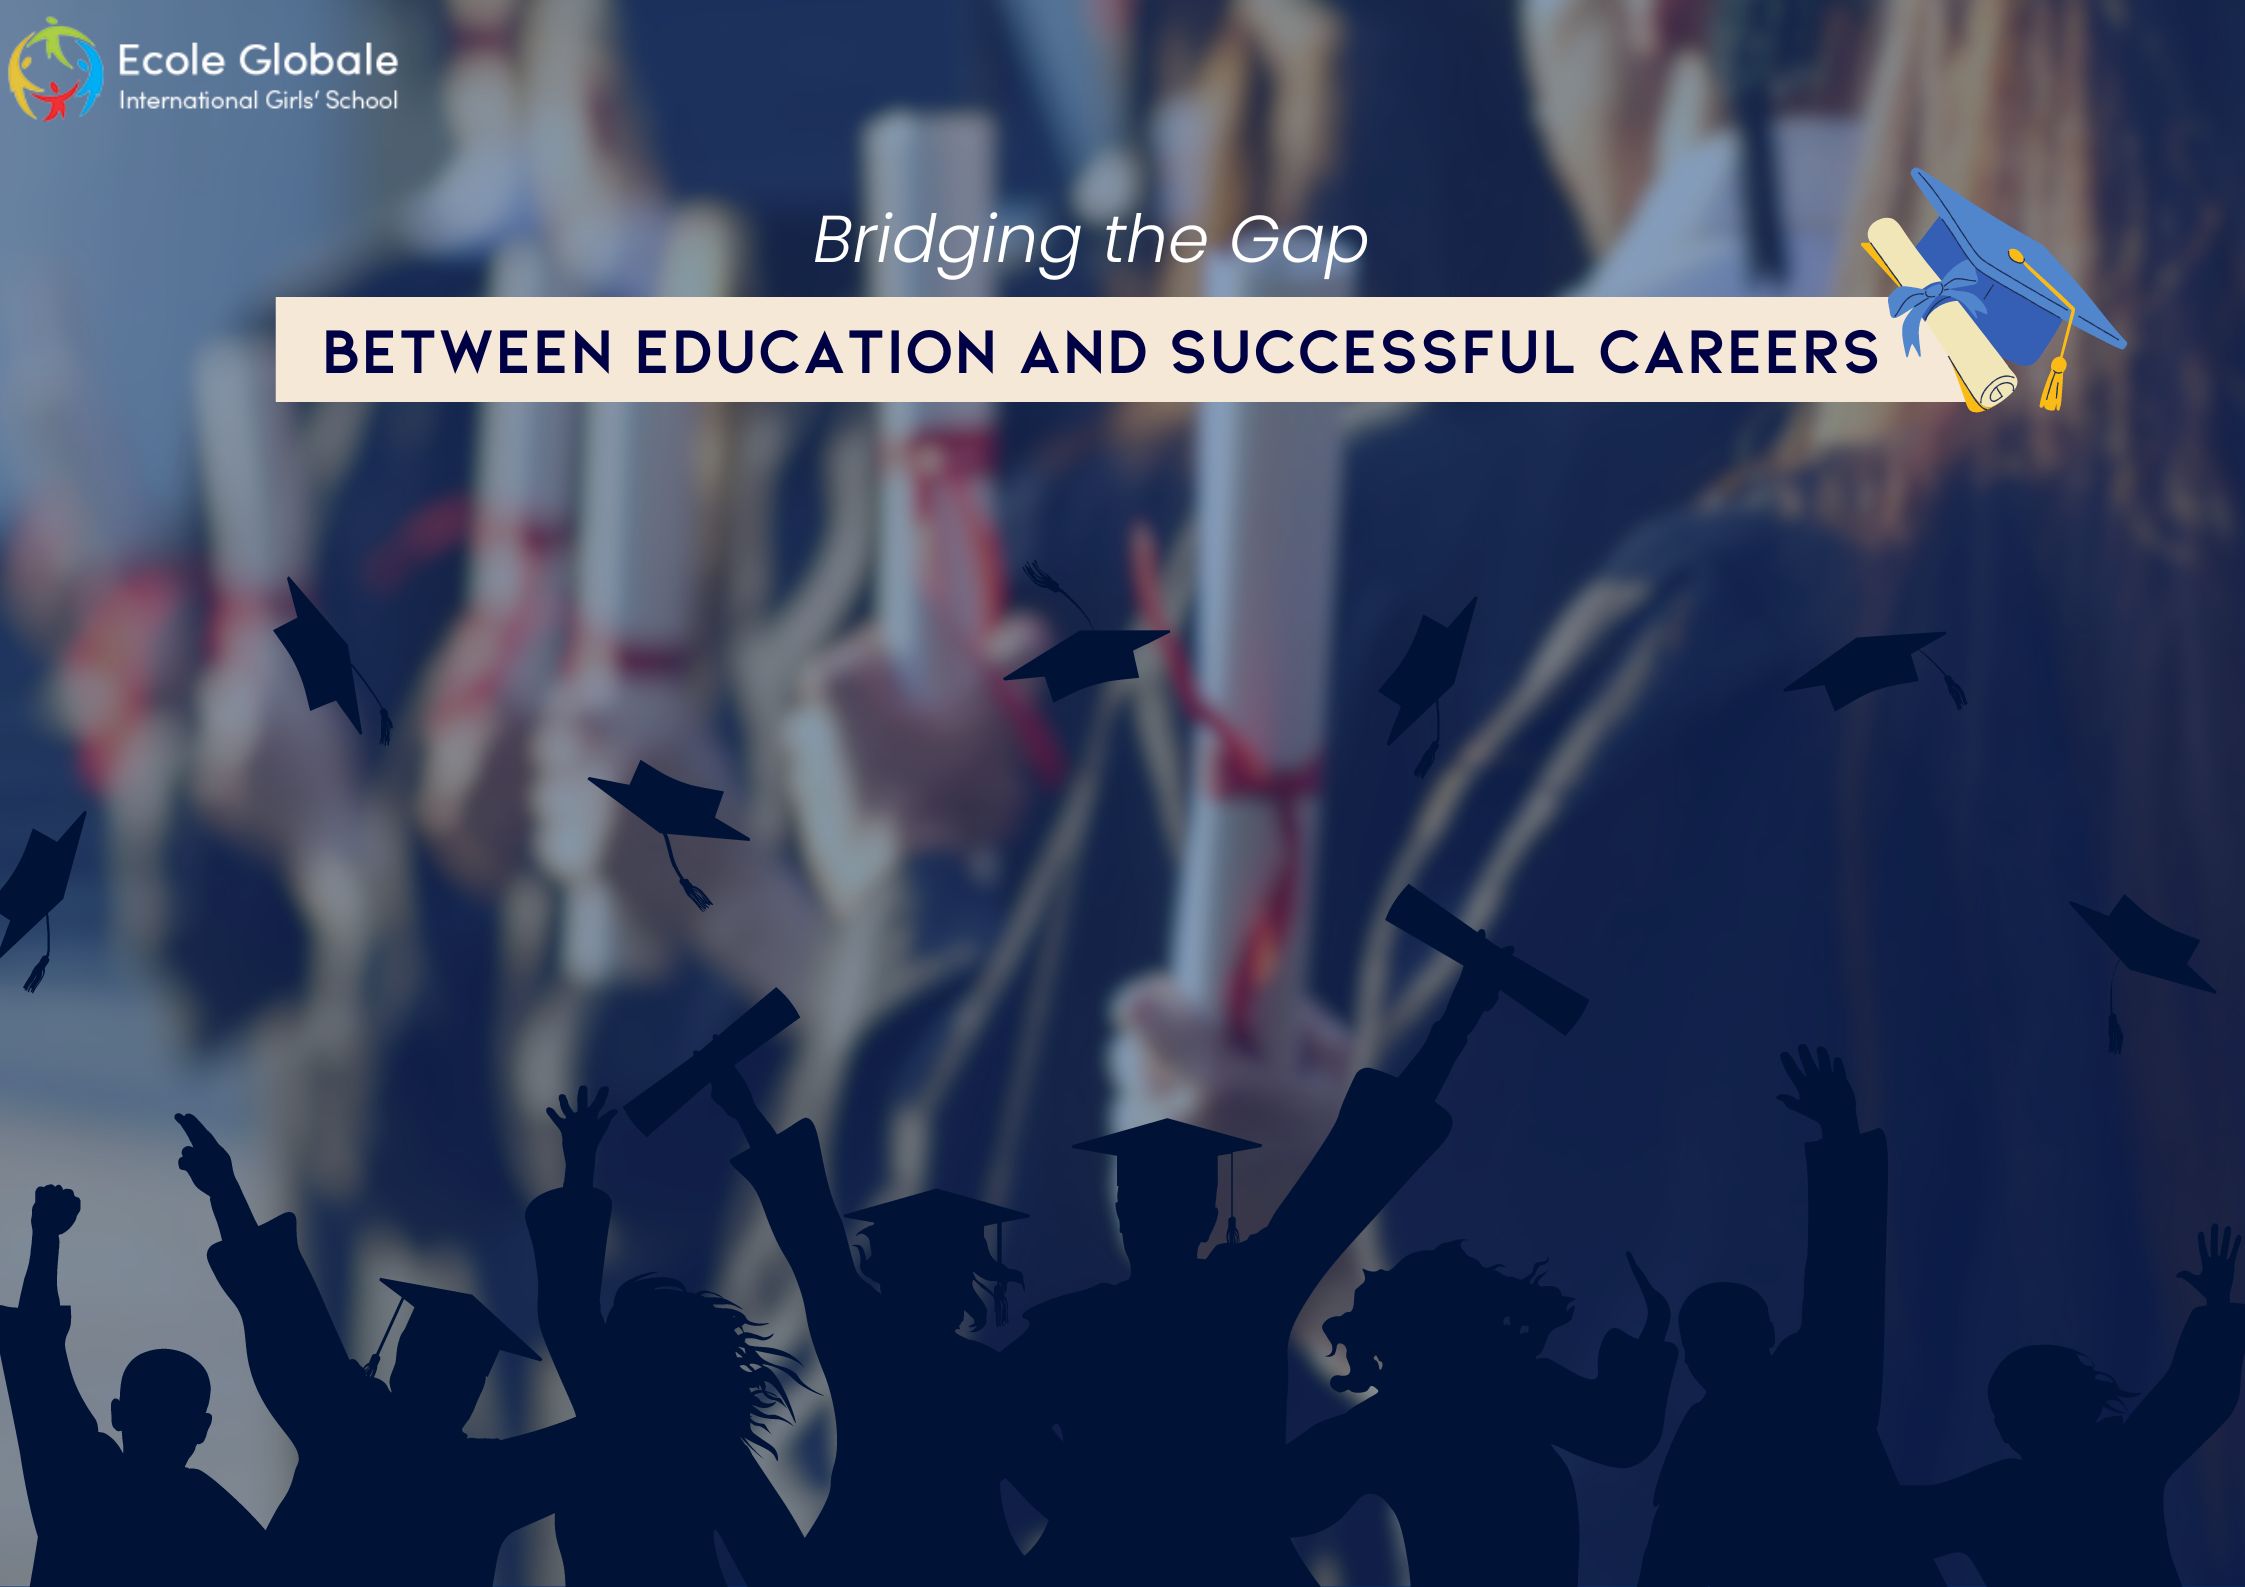 You are currently viewing Bridging the Gap between Education and Successful Careers | Ecole Globale